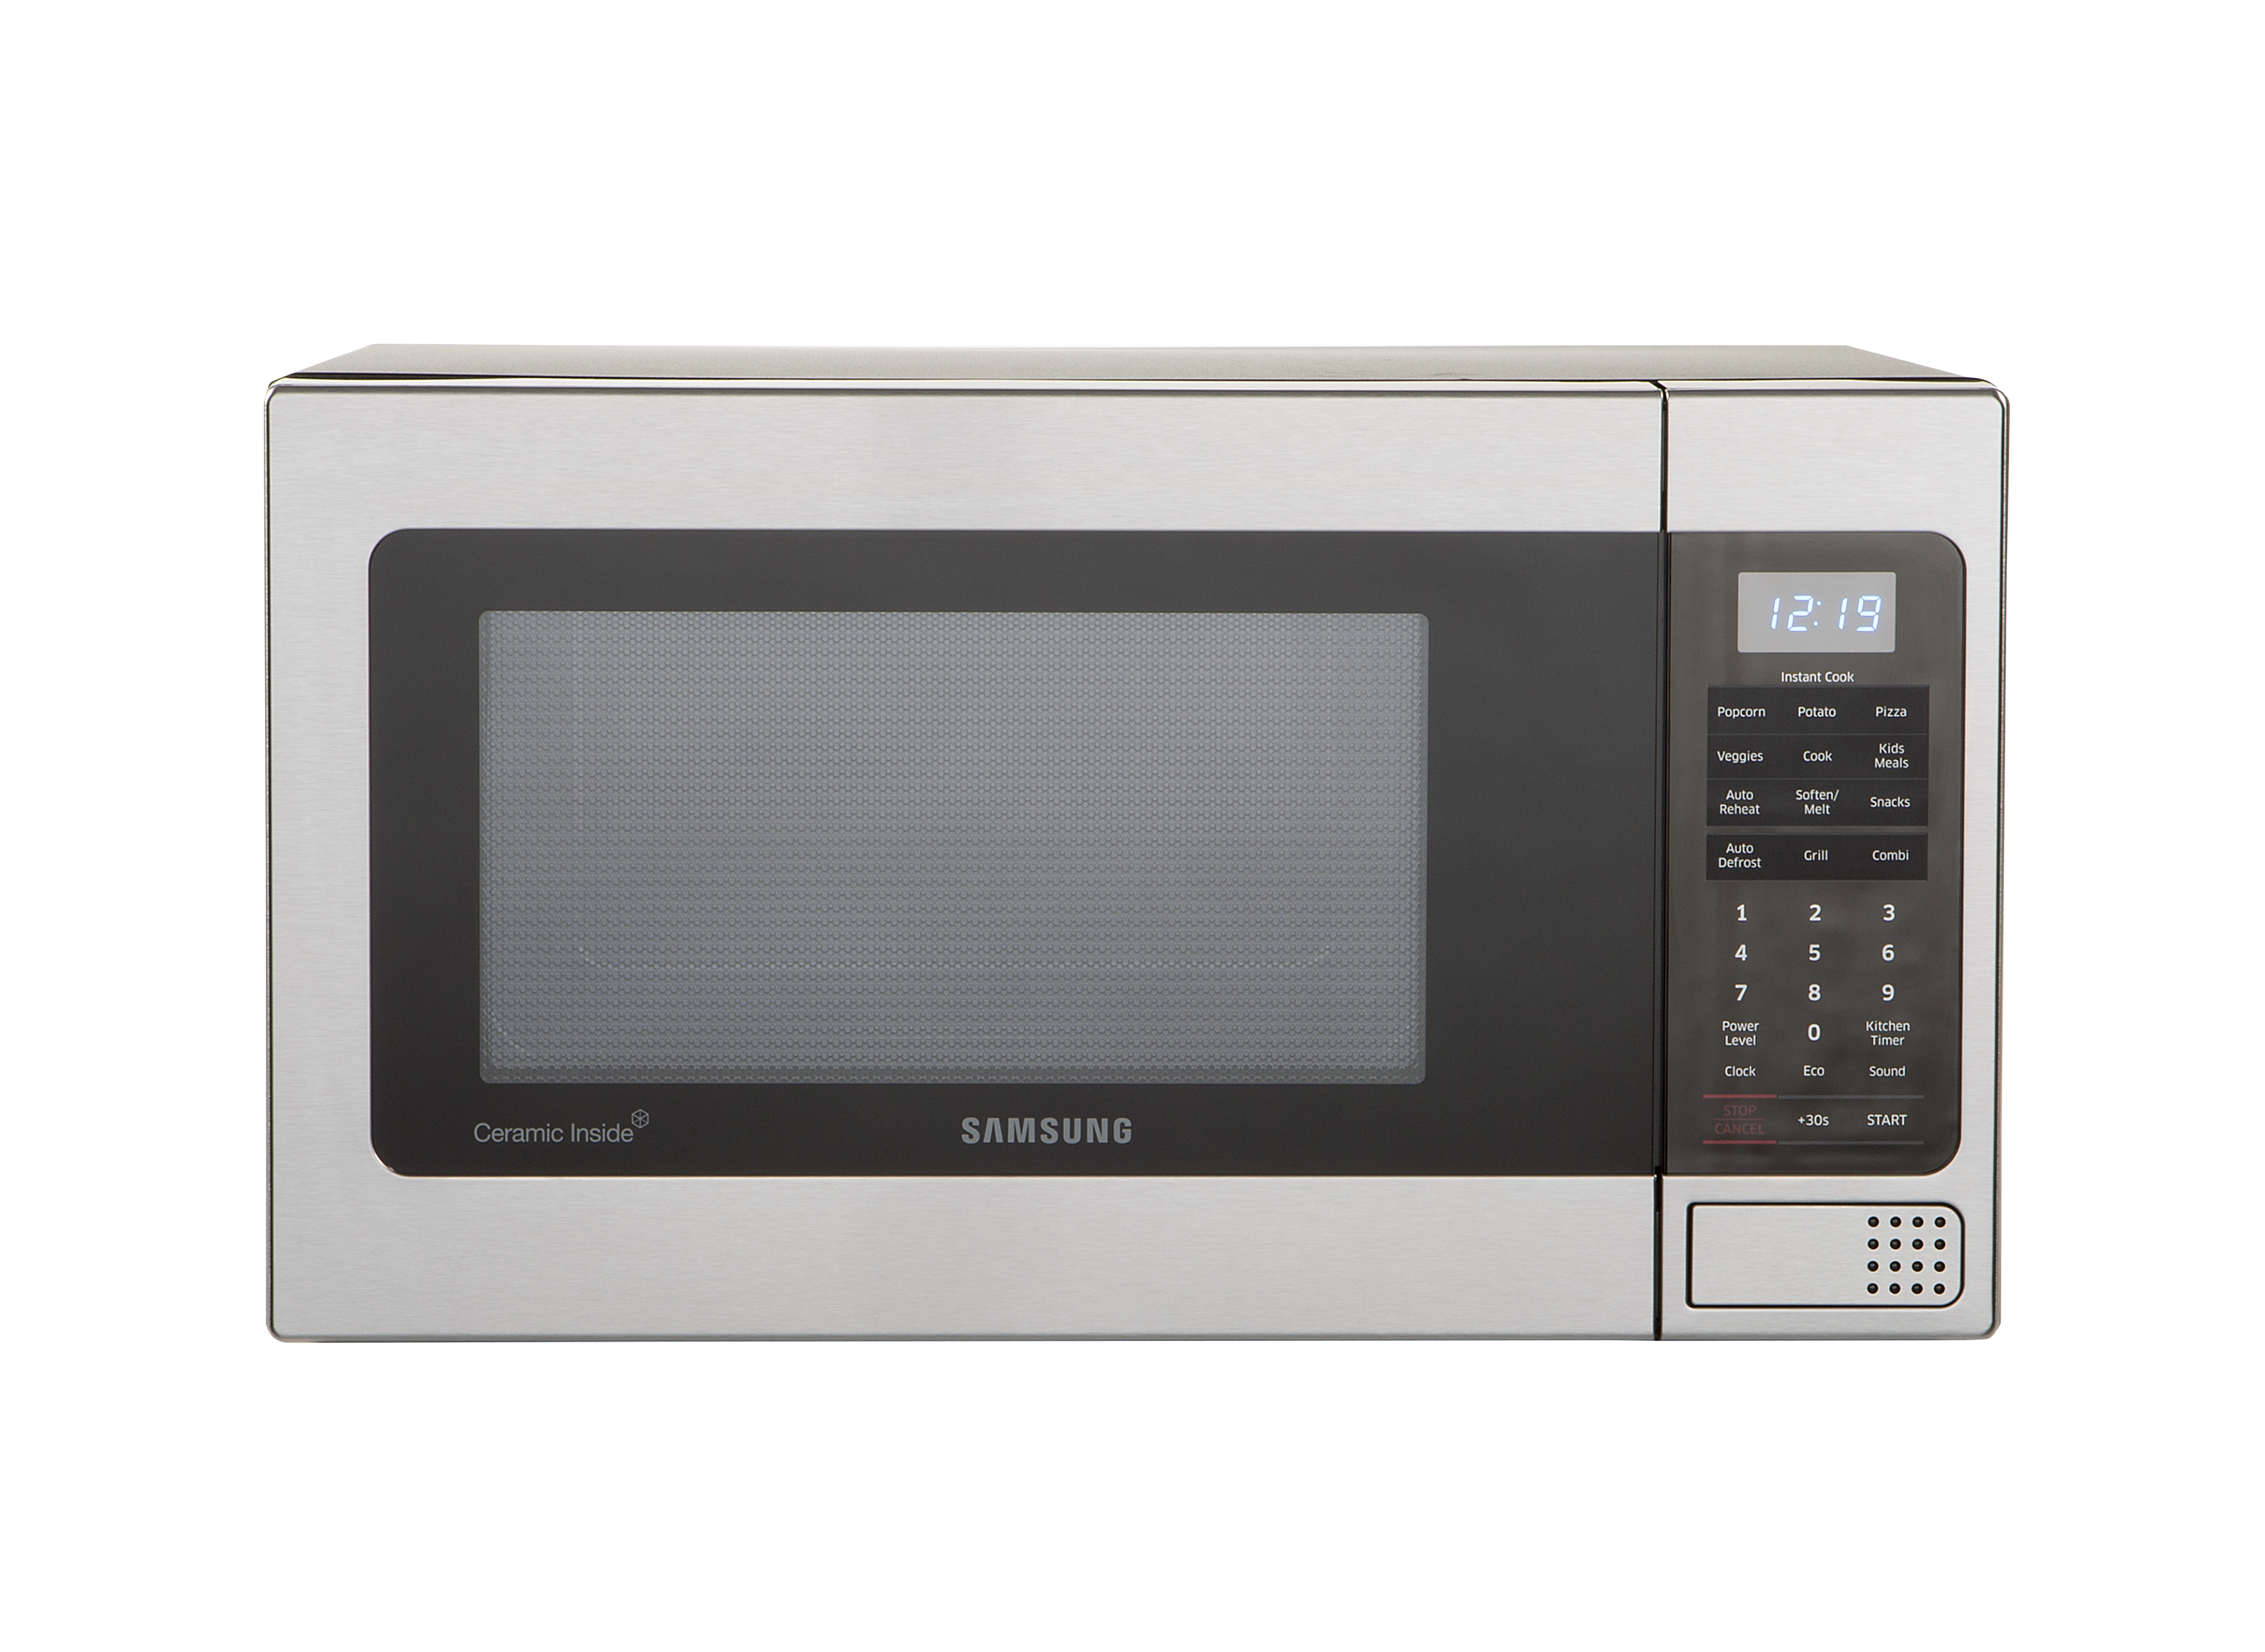 https://crdms.images.consumerreports.org/prod/products/cr/models/373548-countertopmicrowaveovens-samsung-mg11h2020ct.png